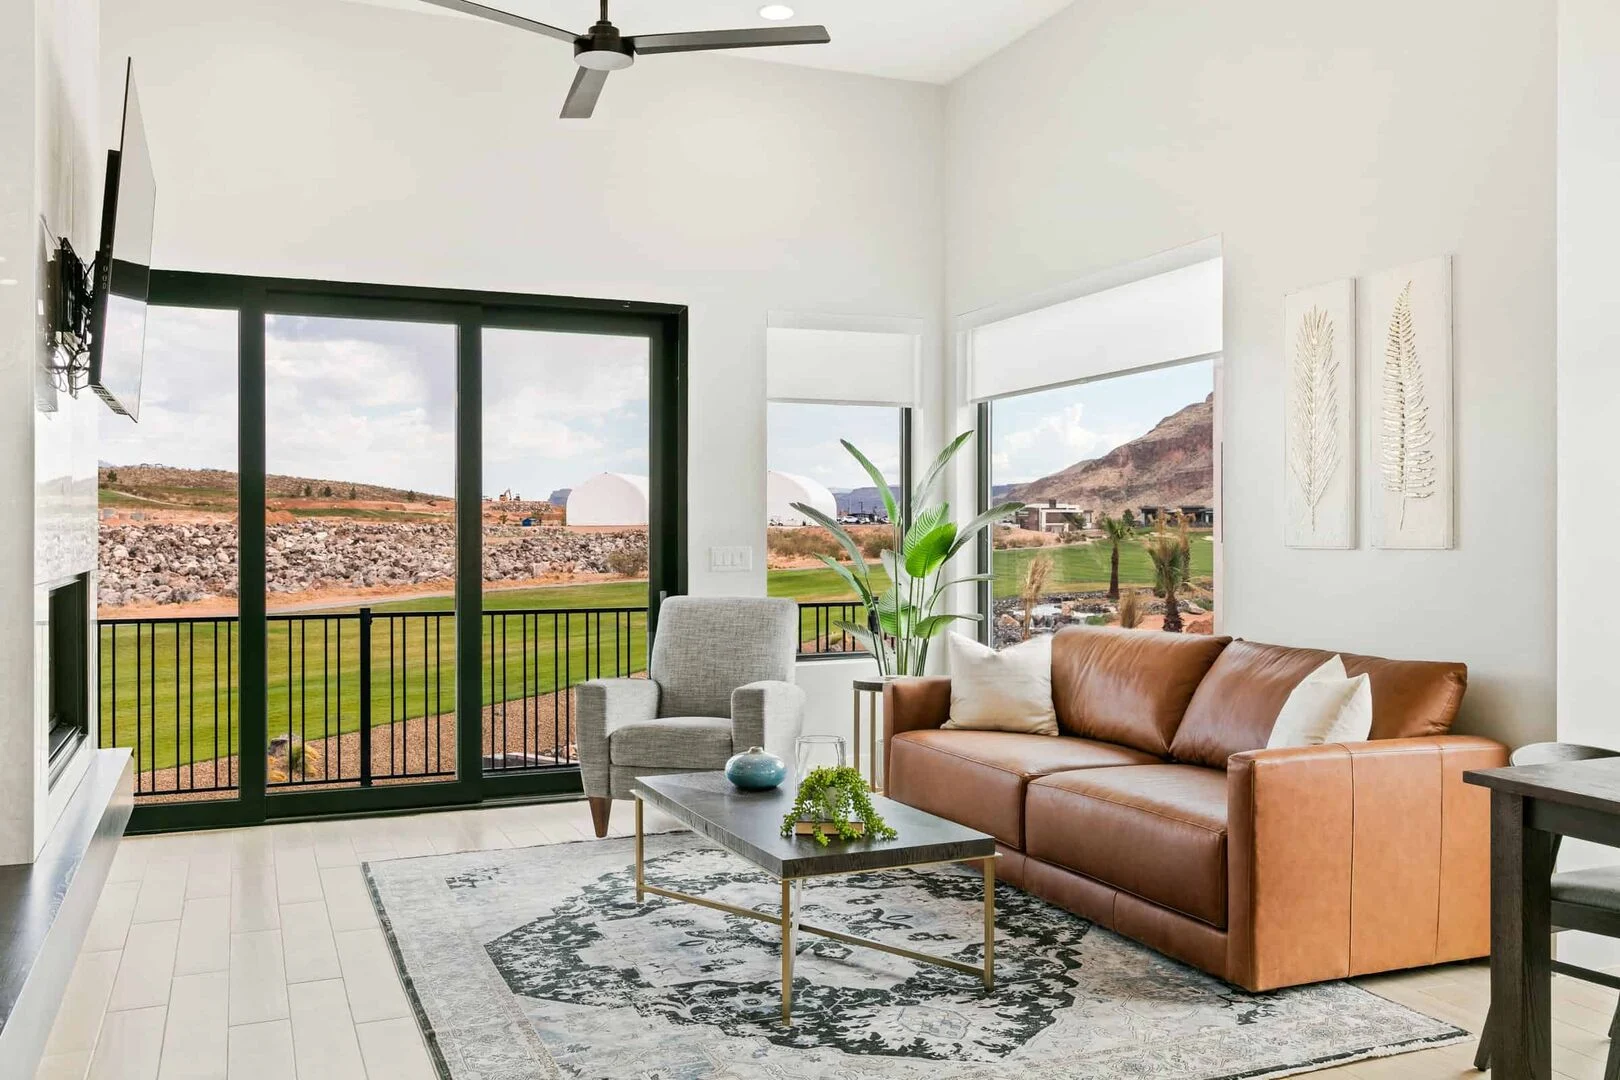 Are Vacation Rentals Allowed in St. George Utah